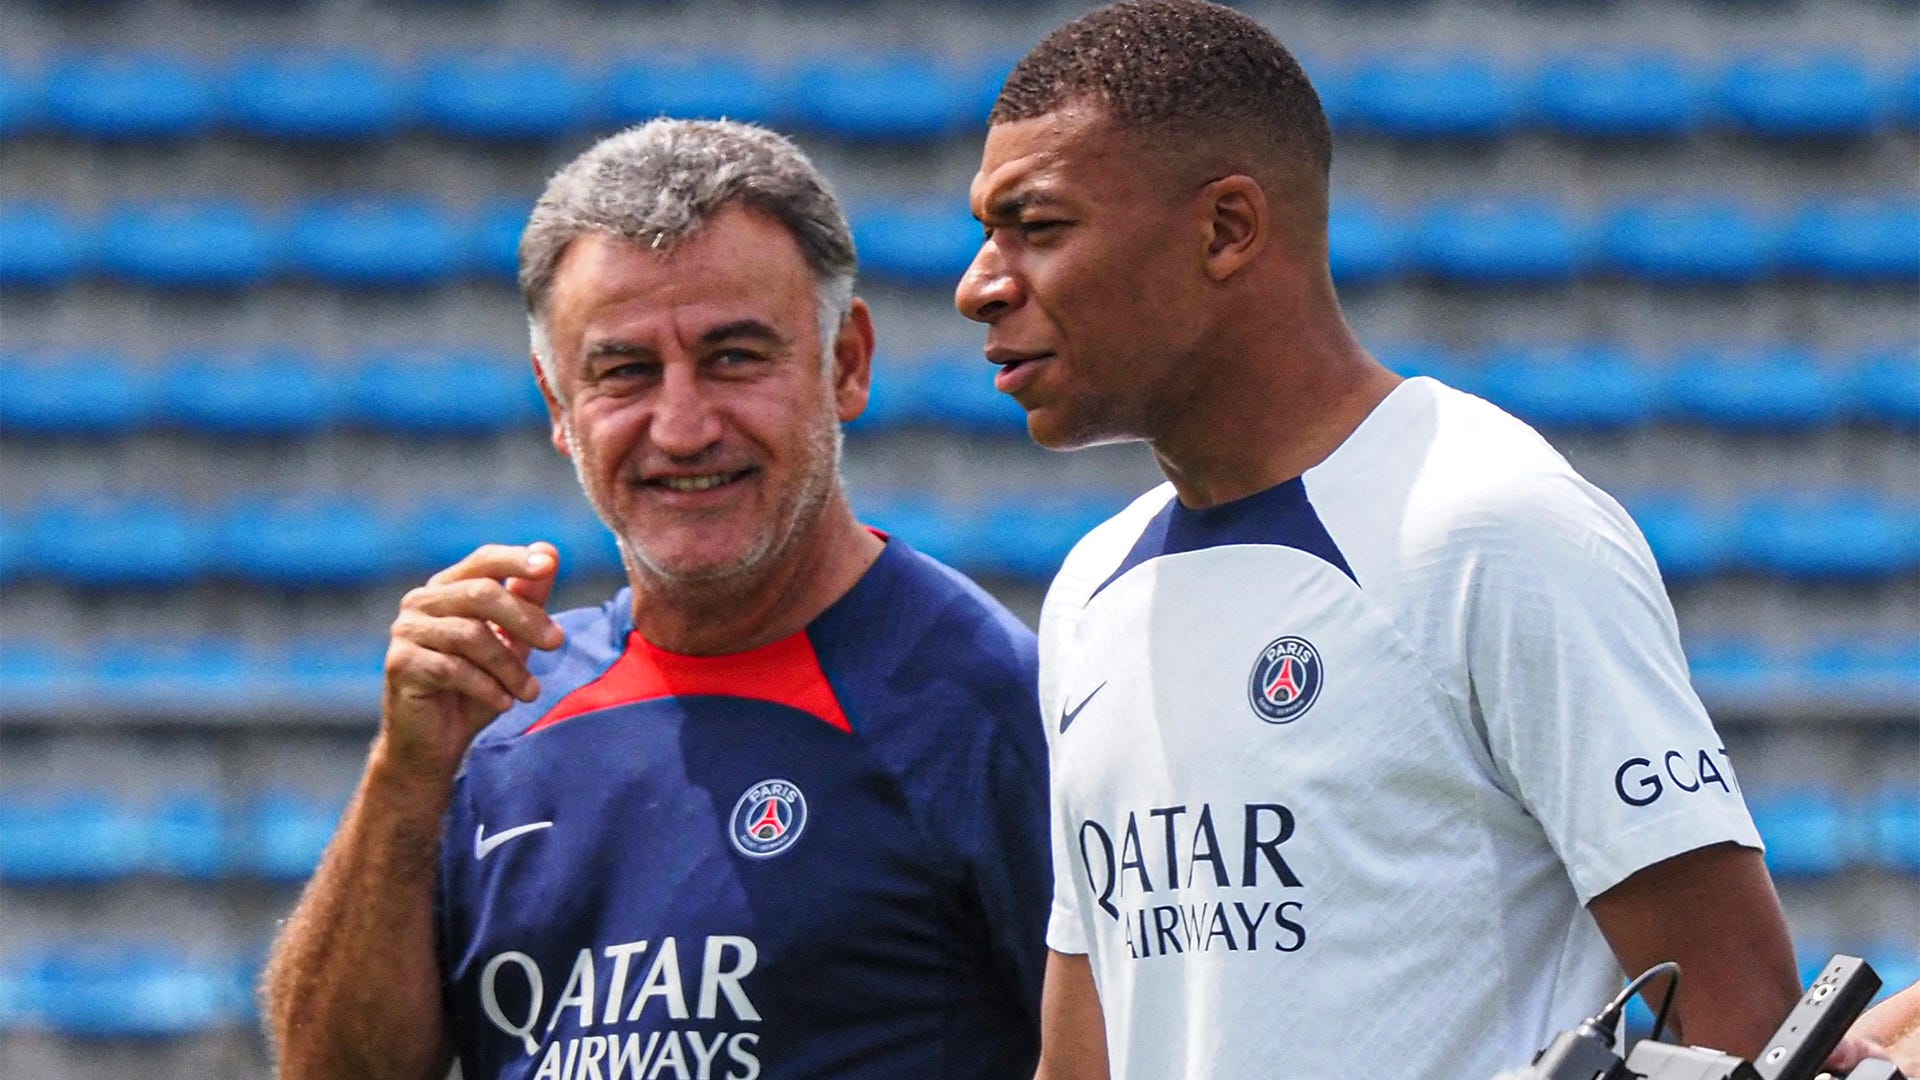 Wake up guys!' - PSG's Mbappe & Galtier blasted for laughing at private jet  question | Goal.com